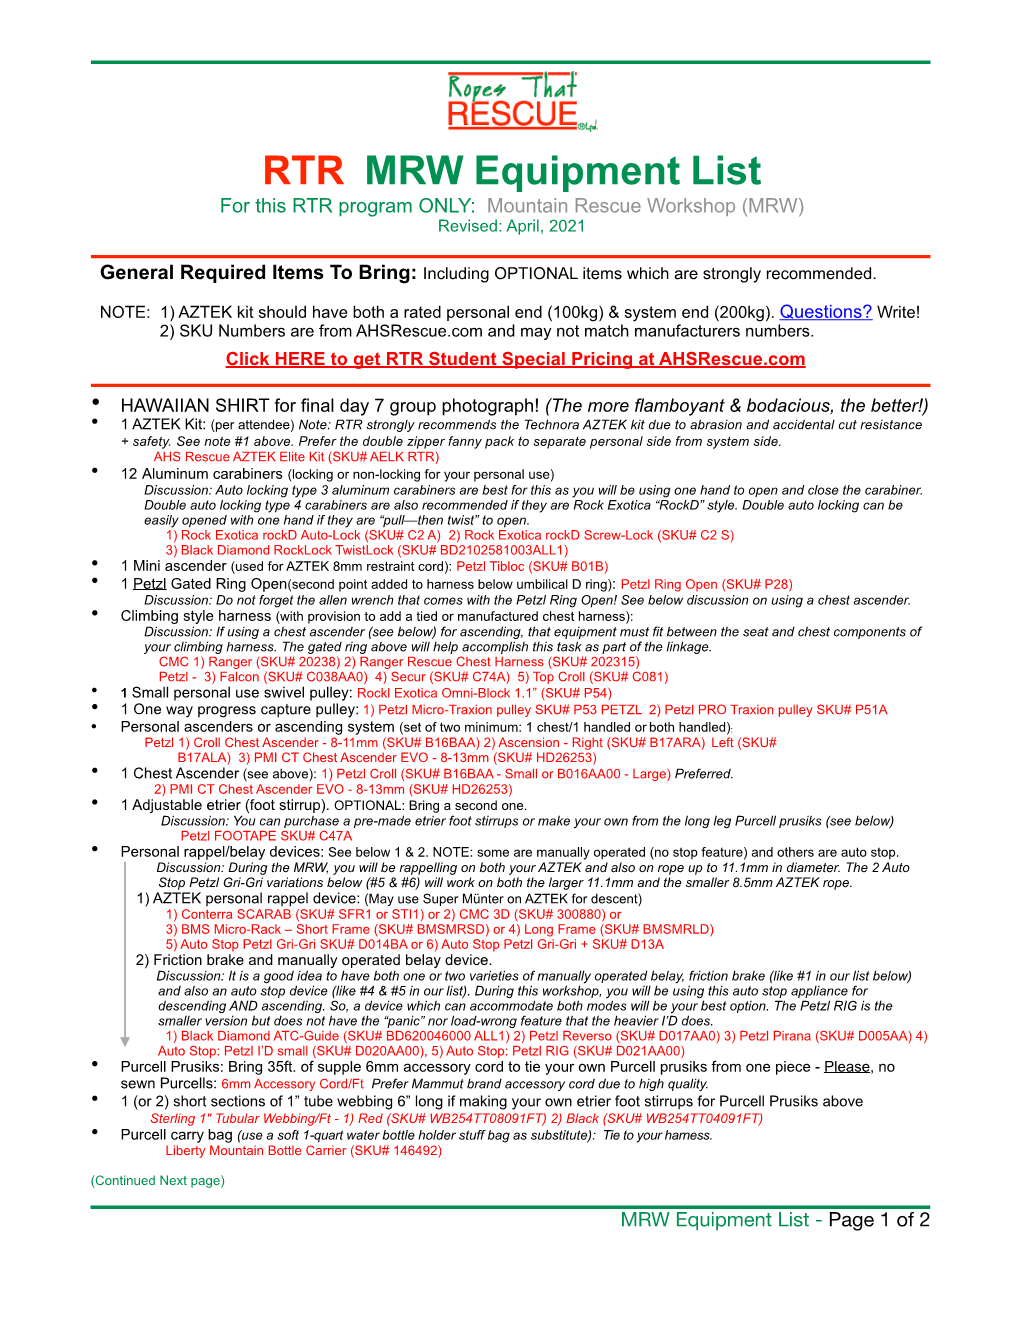 RTR MRW Equipment List for This RTR Program ONLY: Mountain Rescue Workshop (MRW)